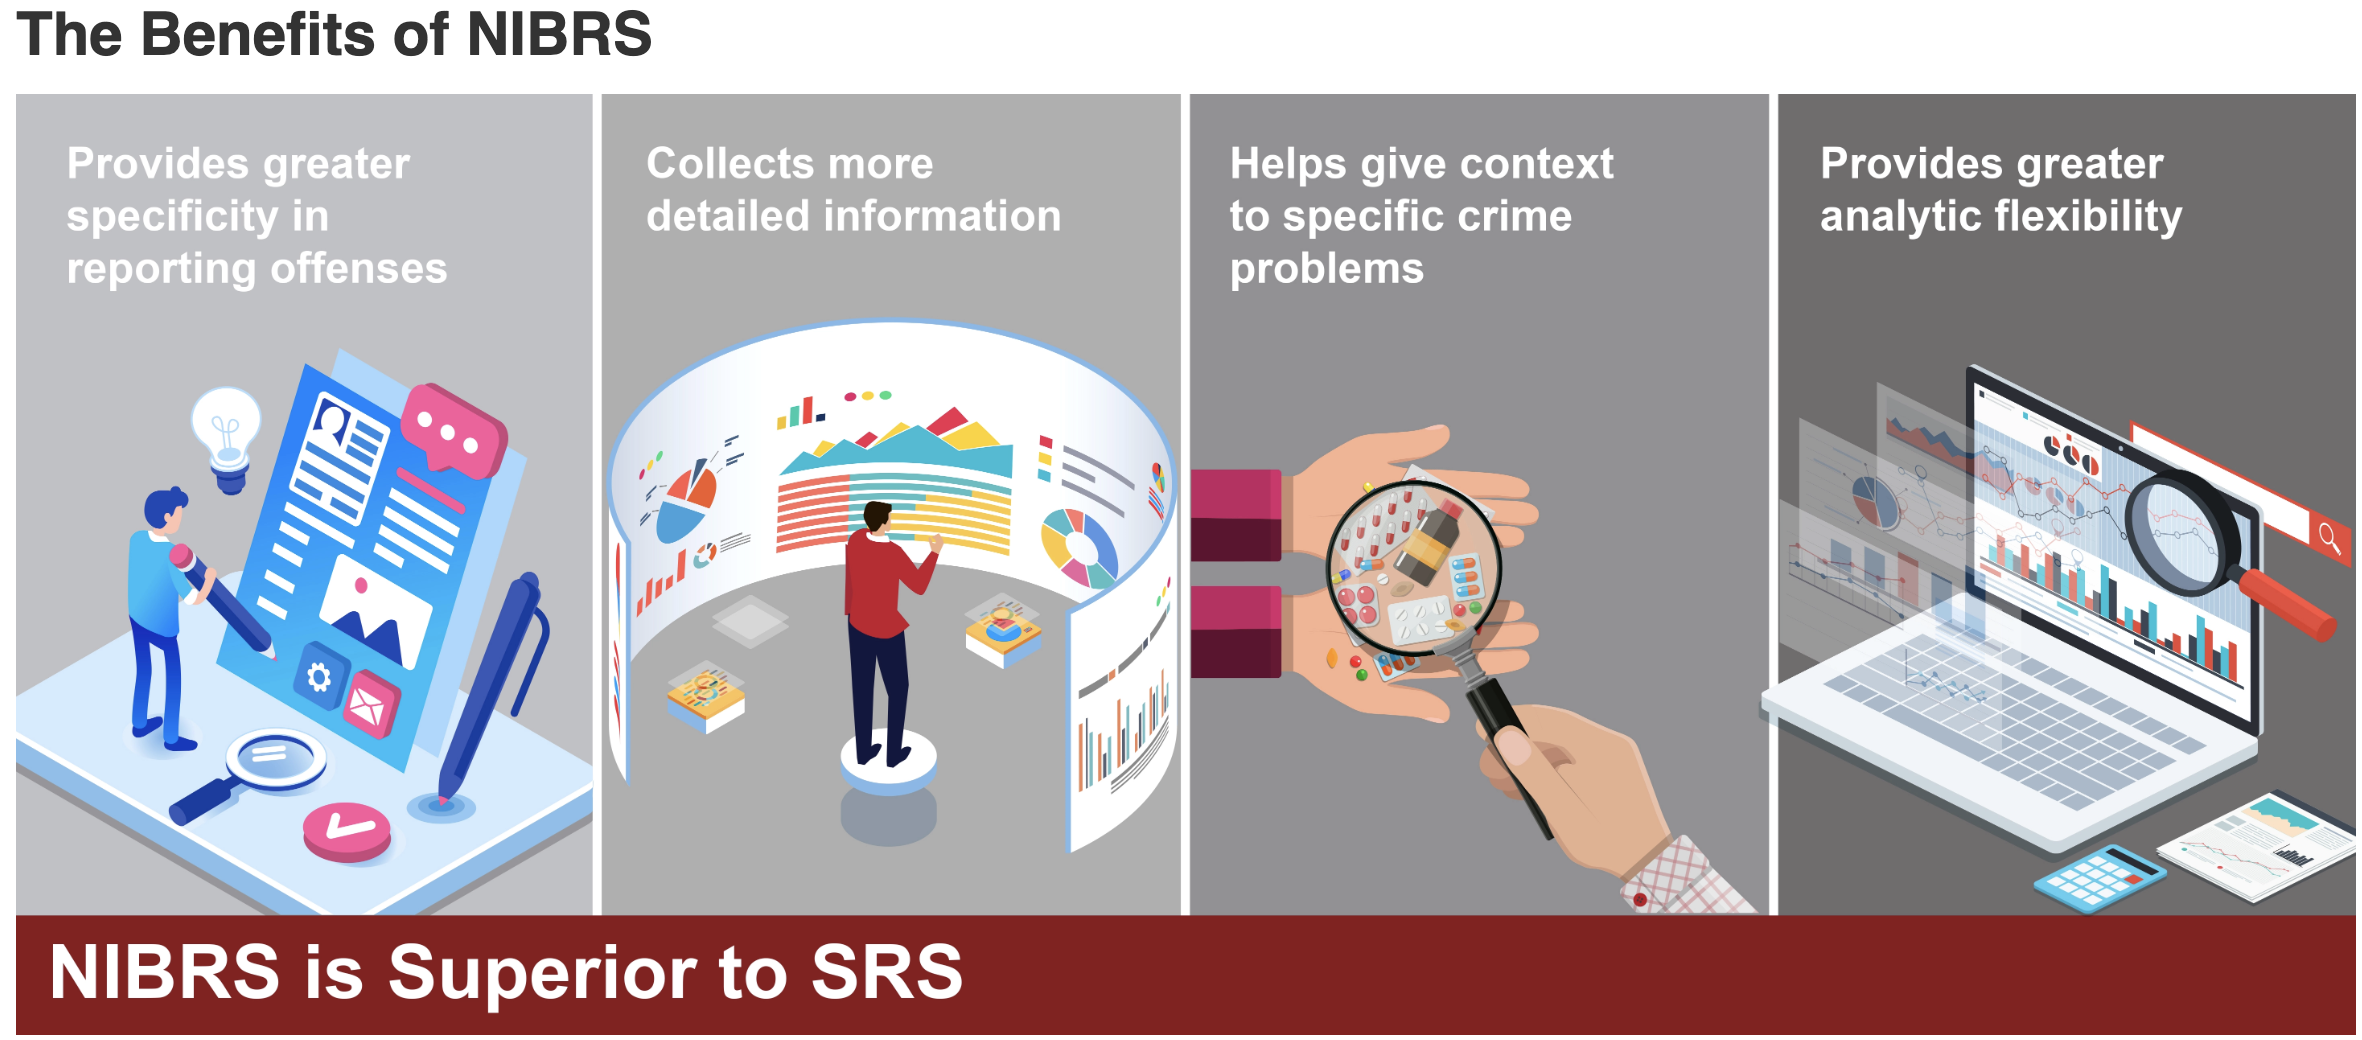 graphic illustrating the benefits of NIBRS: Provides greater specificity in reporting offenses, collects more detailed information, helps give context to specific crime problems, provides greater analytic flexibility